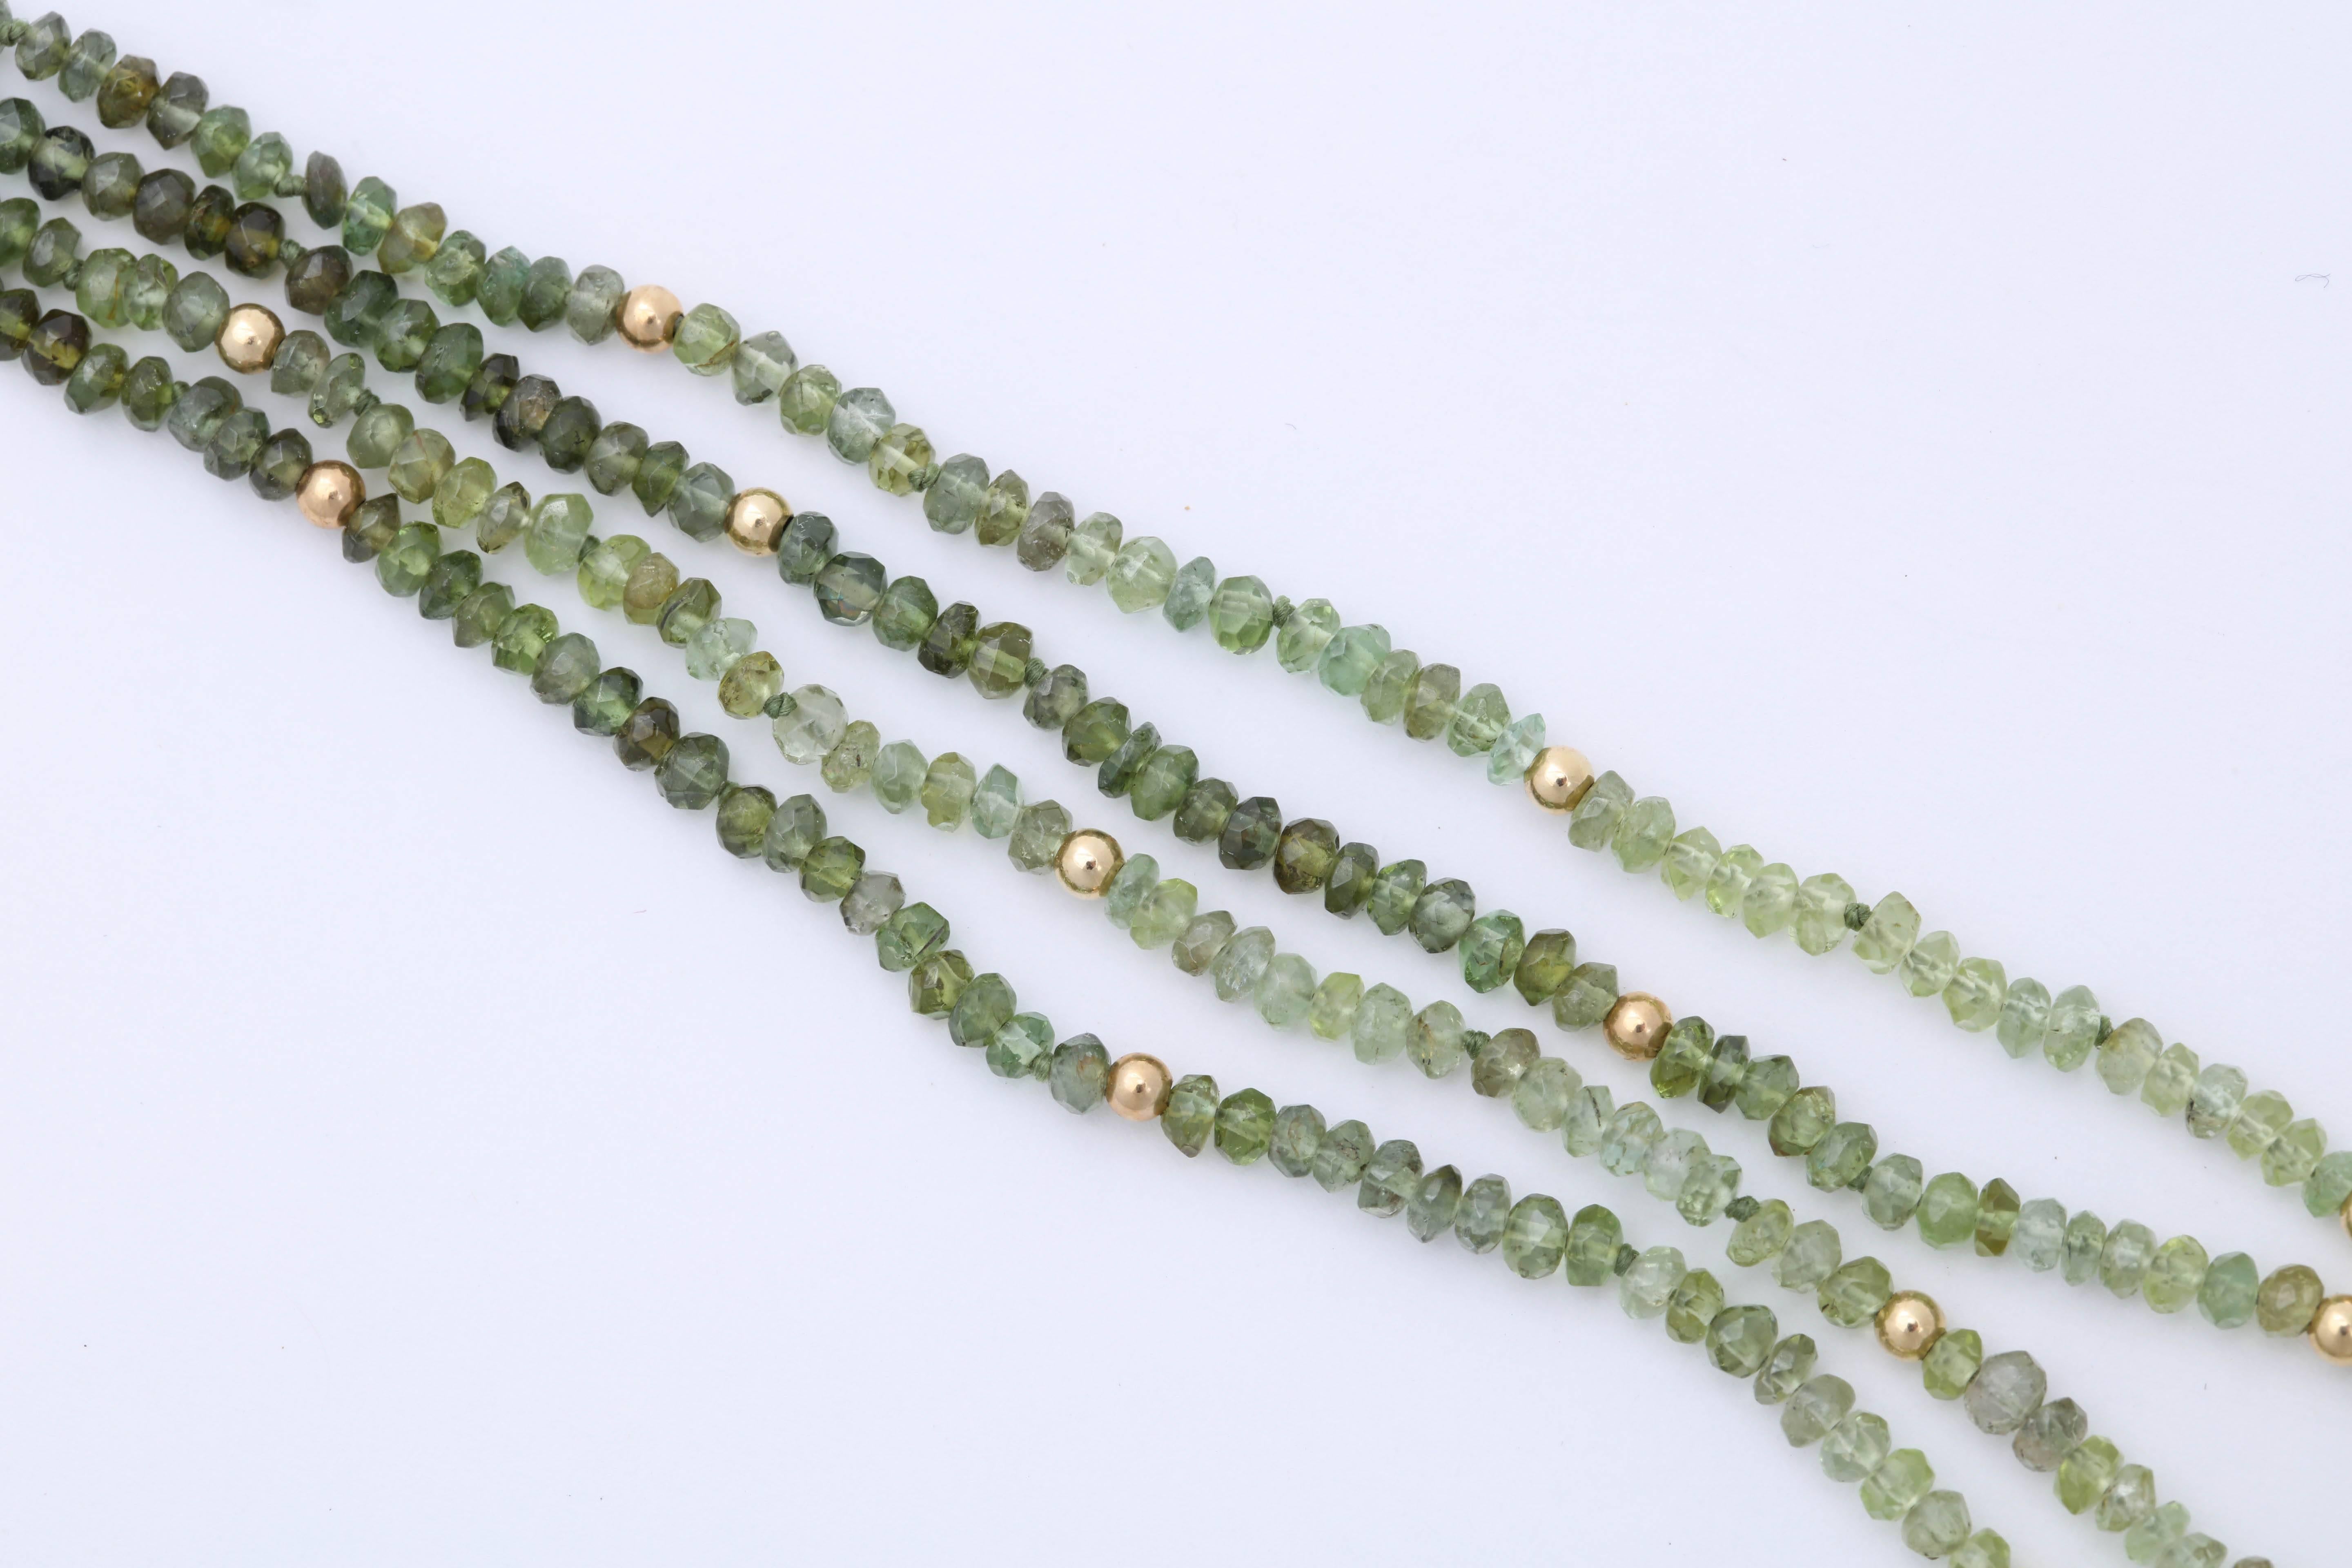 Green Tourmaline Bead and Cabochon Necklace For Sale 2